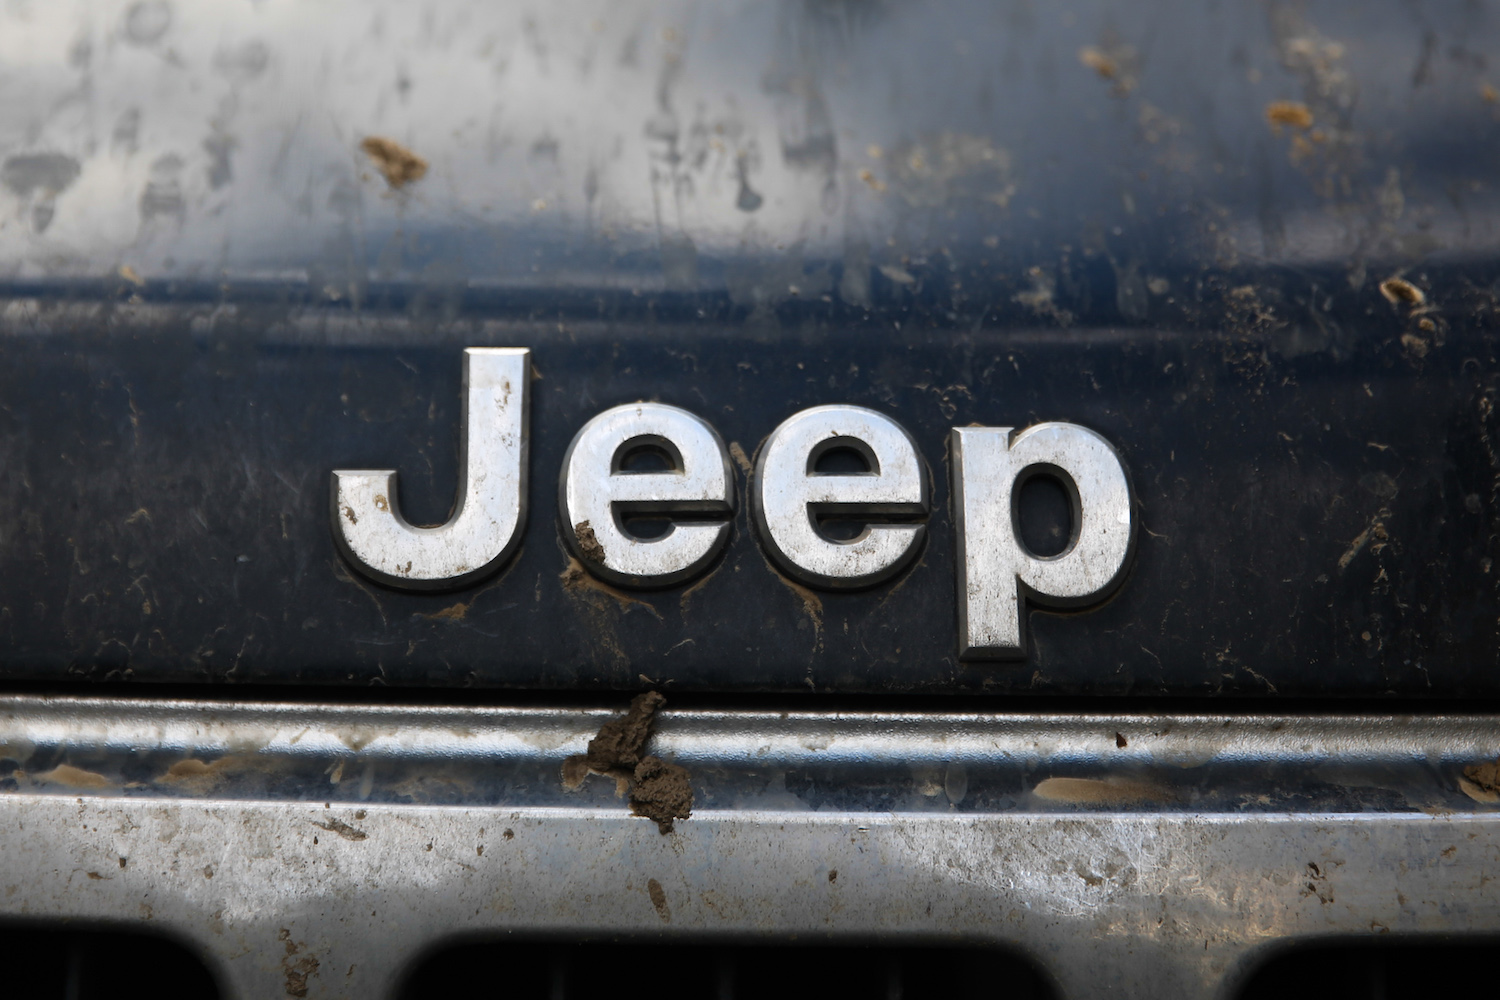 A muddy Jeep logo depicting a trademarked SUV brand name.